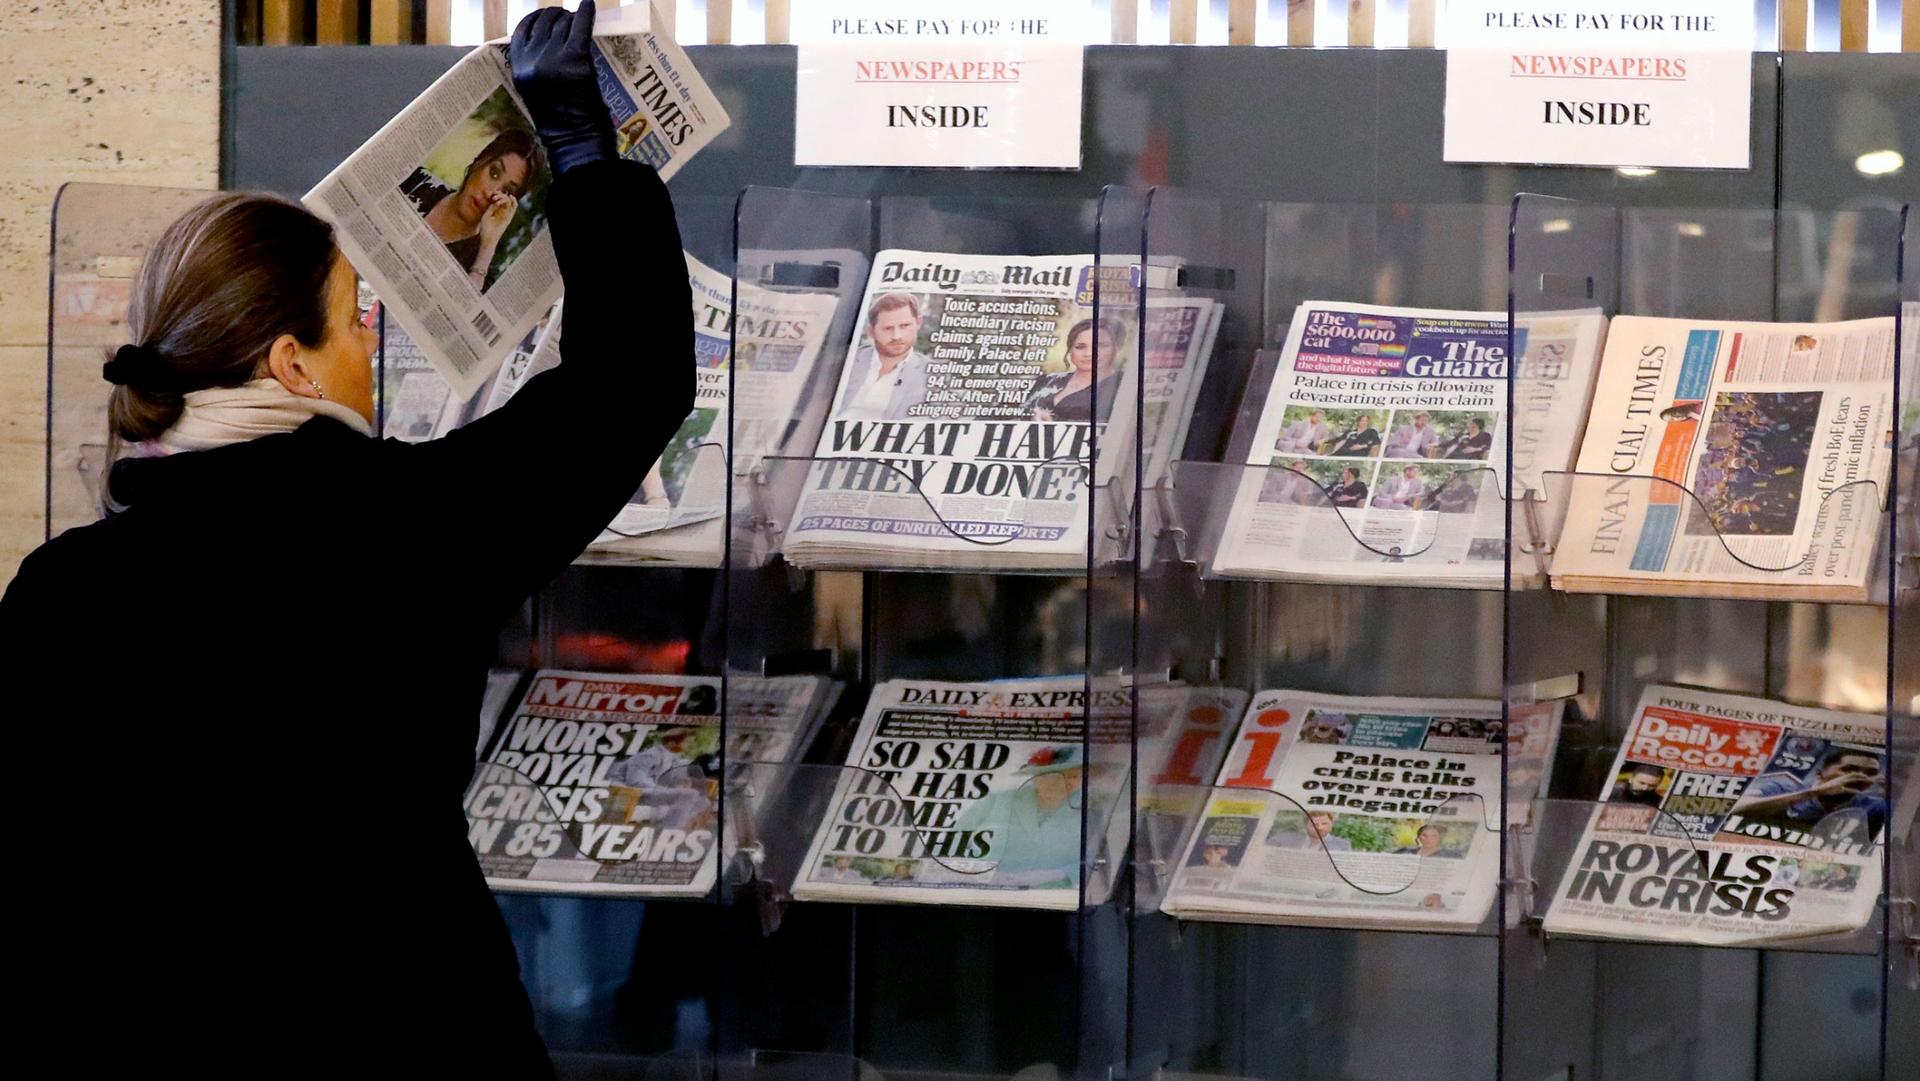 A woman is shown wearing a dark coat and pulling a newspaper out of a stand in a row of several other newspapers.